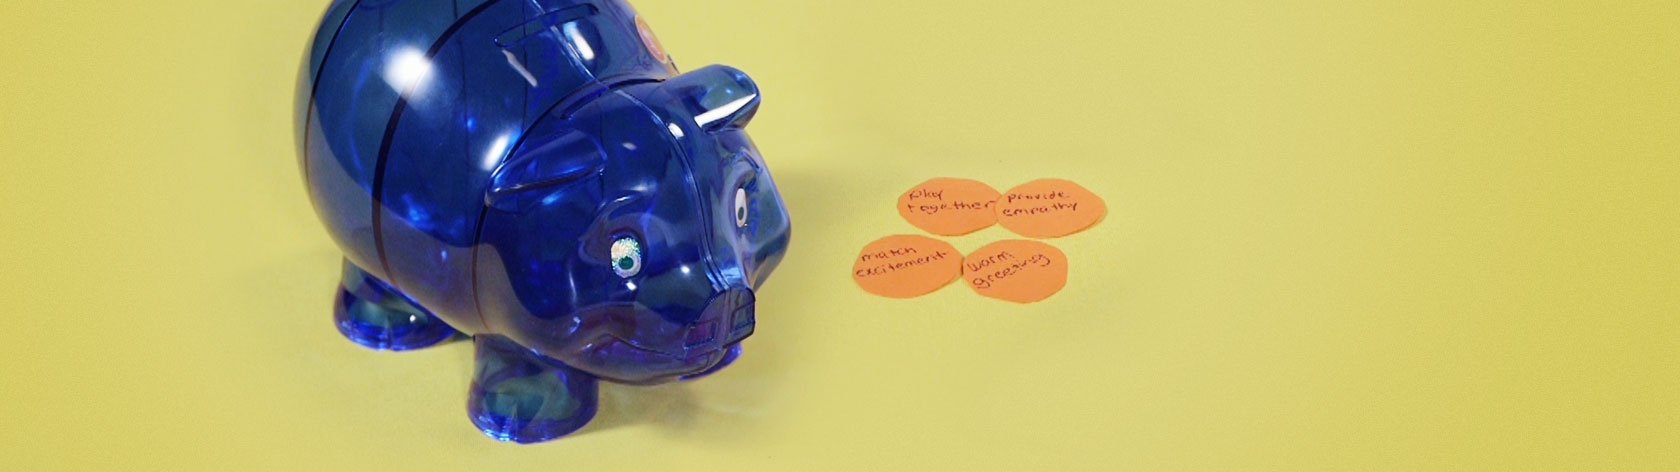 Blue plastic piggy bank from Circle Time Magazine show